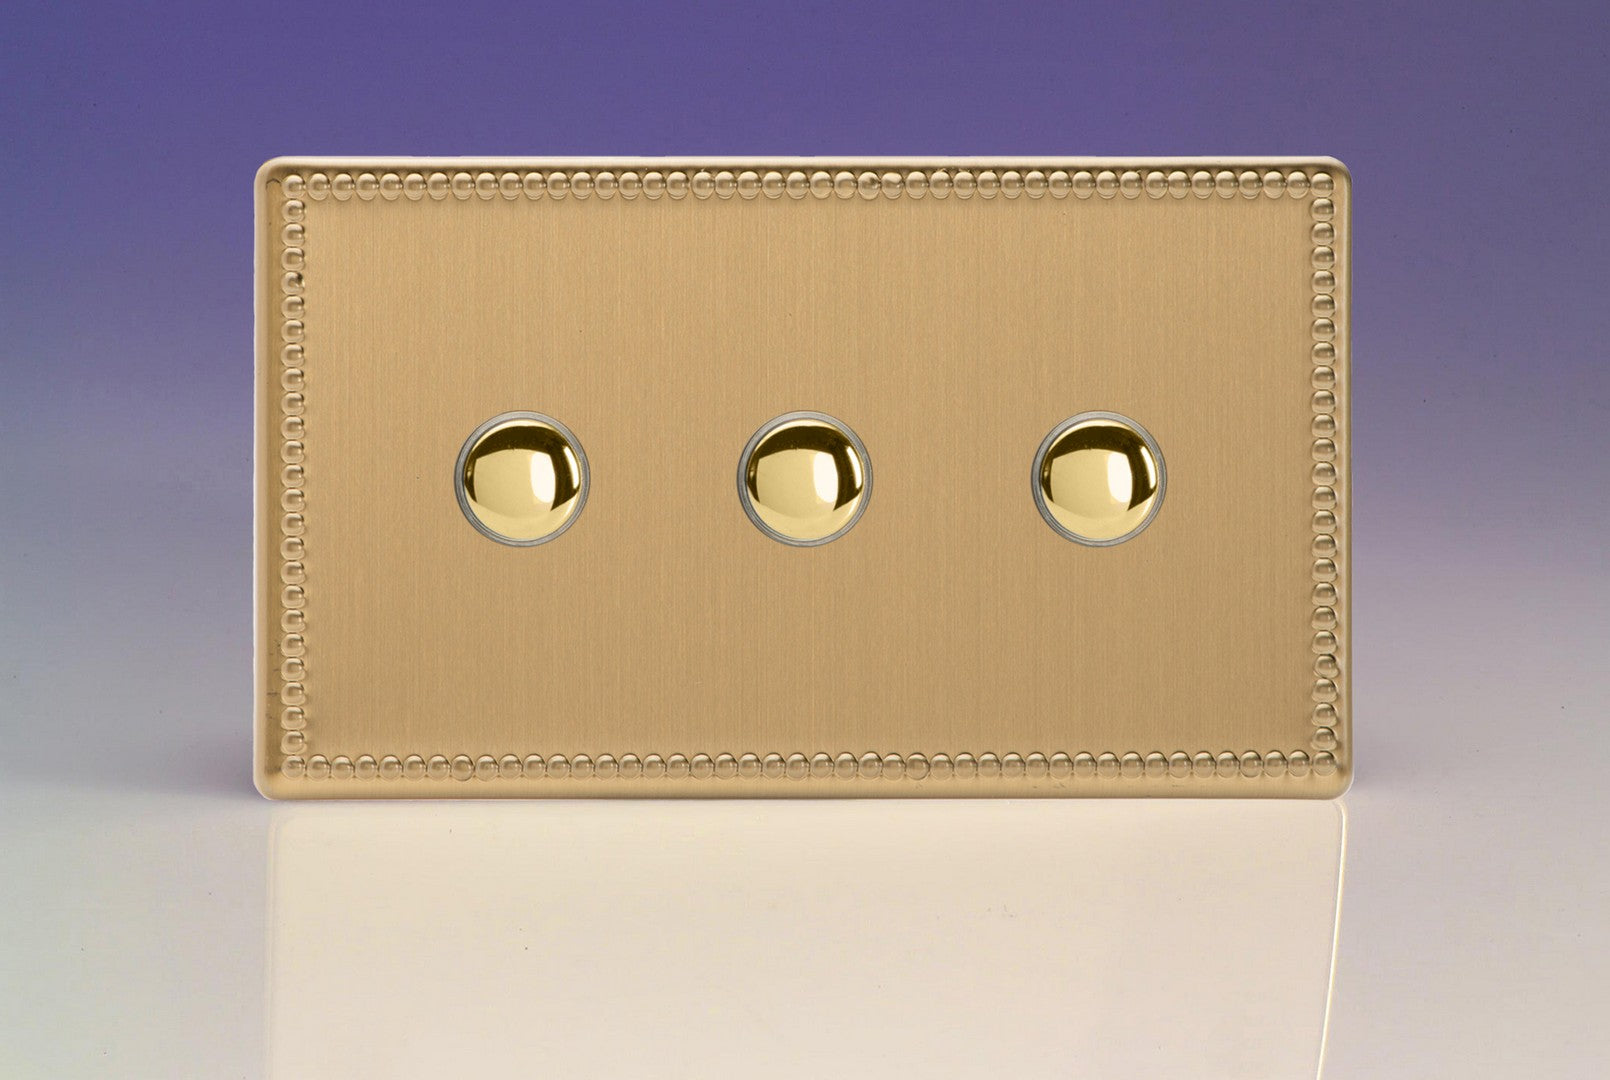 Varilight IJDYS003S.JB Jubilee Brushed Brass 3-Gang Tactile Touch Control Dimming Slave for use with Master on 2-Way Circuits (Twin Plate)